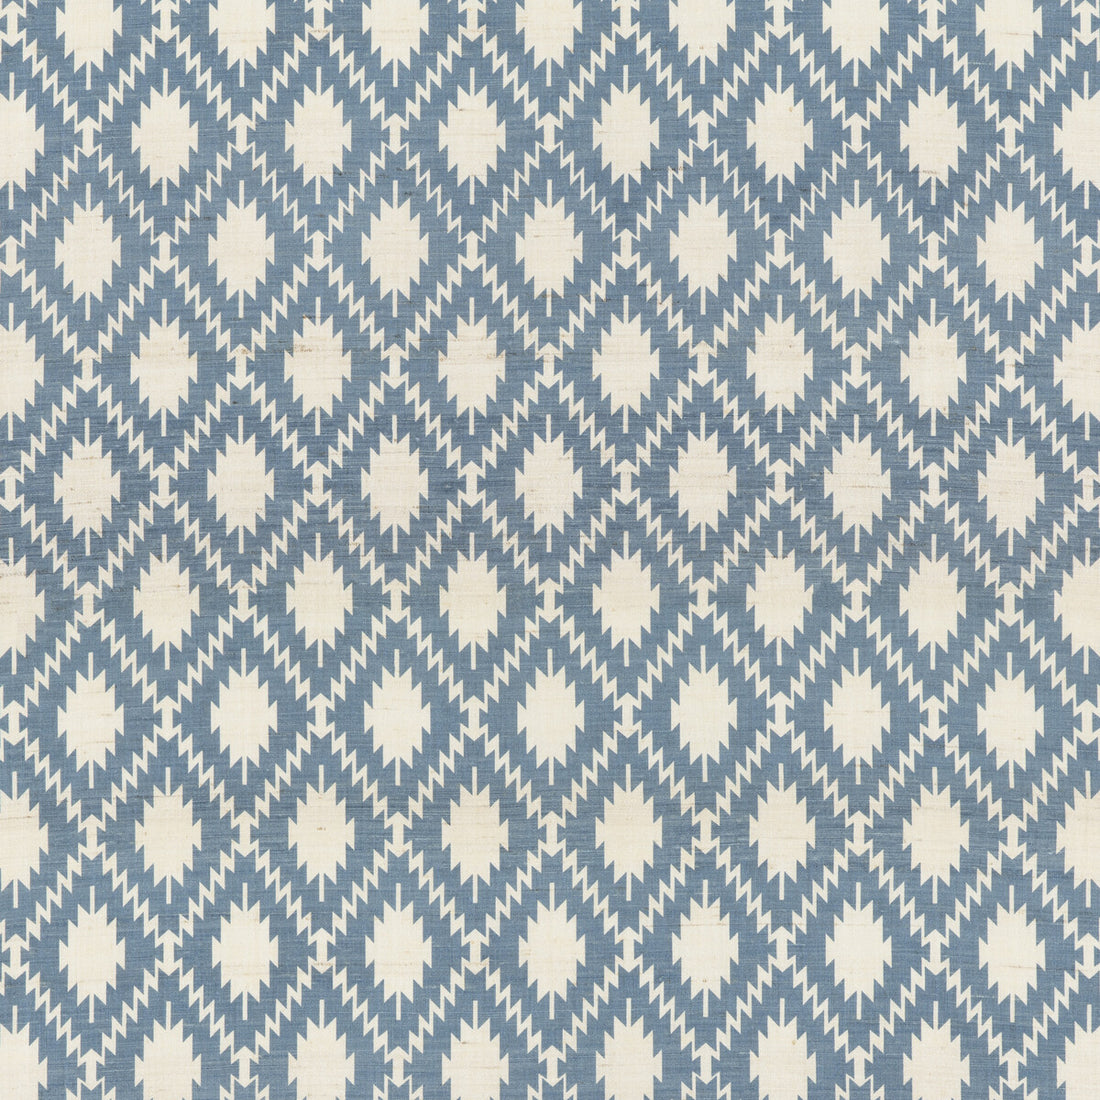 Bagatelle fabric in blue color - pattern BP10908.1.0 - by G P &amp; J Baker in the Portobello collection